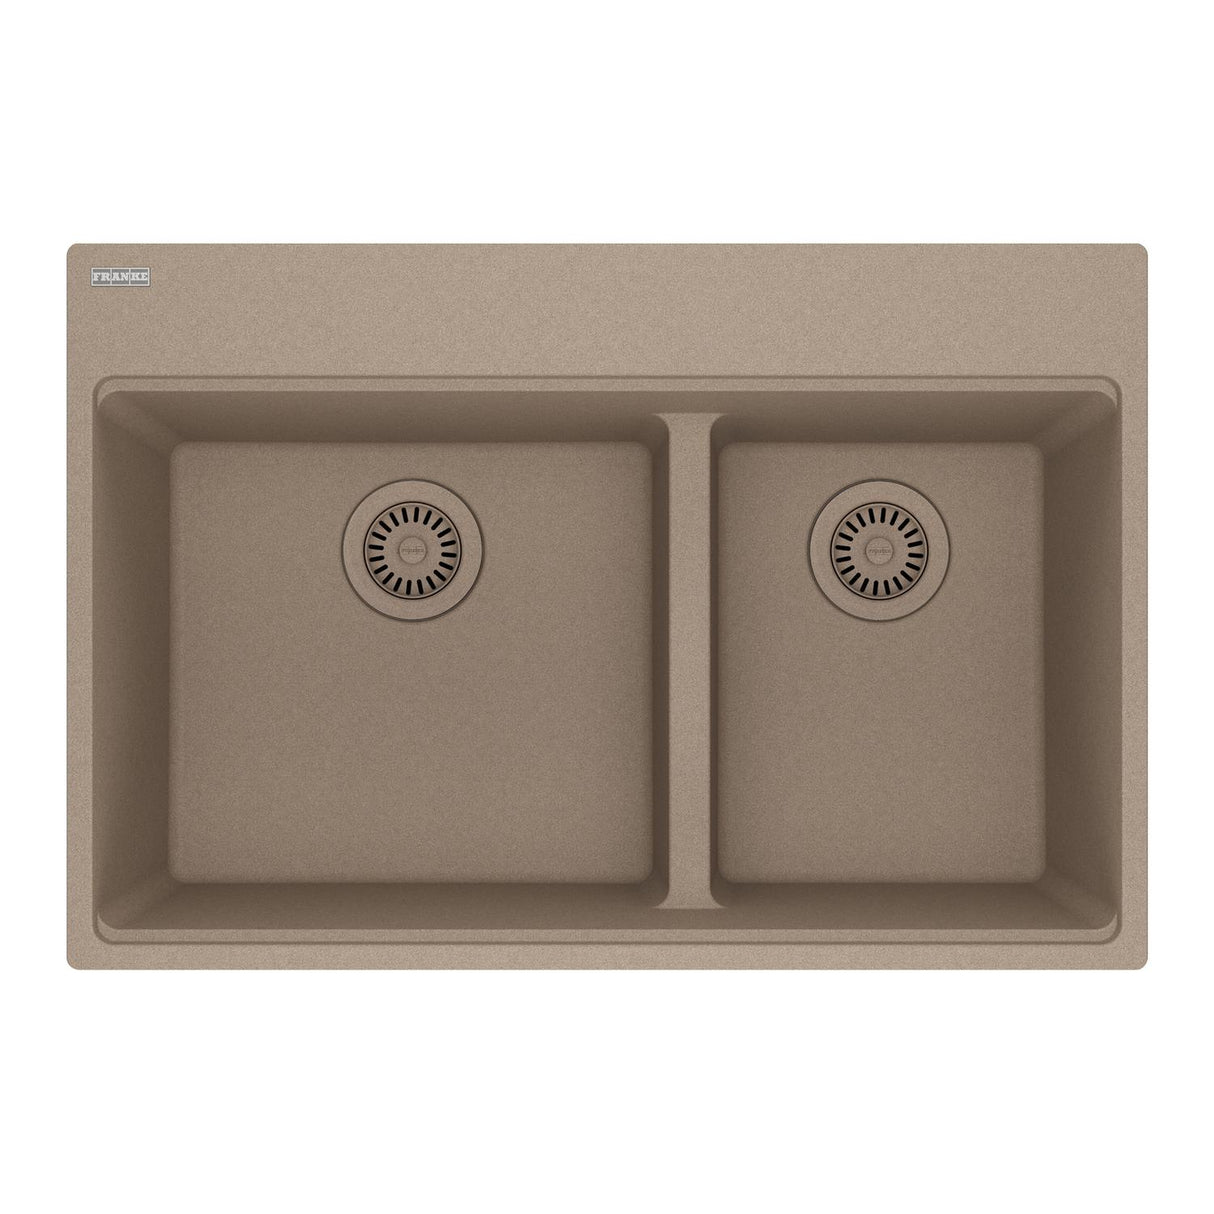 FRANKE MAG6601611LD-OYS Maris Topmount 31-in x 20.9-in Granite Double Bowl Kitchen Sink in Oyster In Oyster